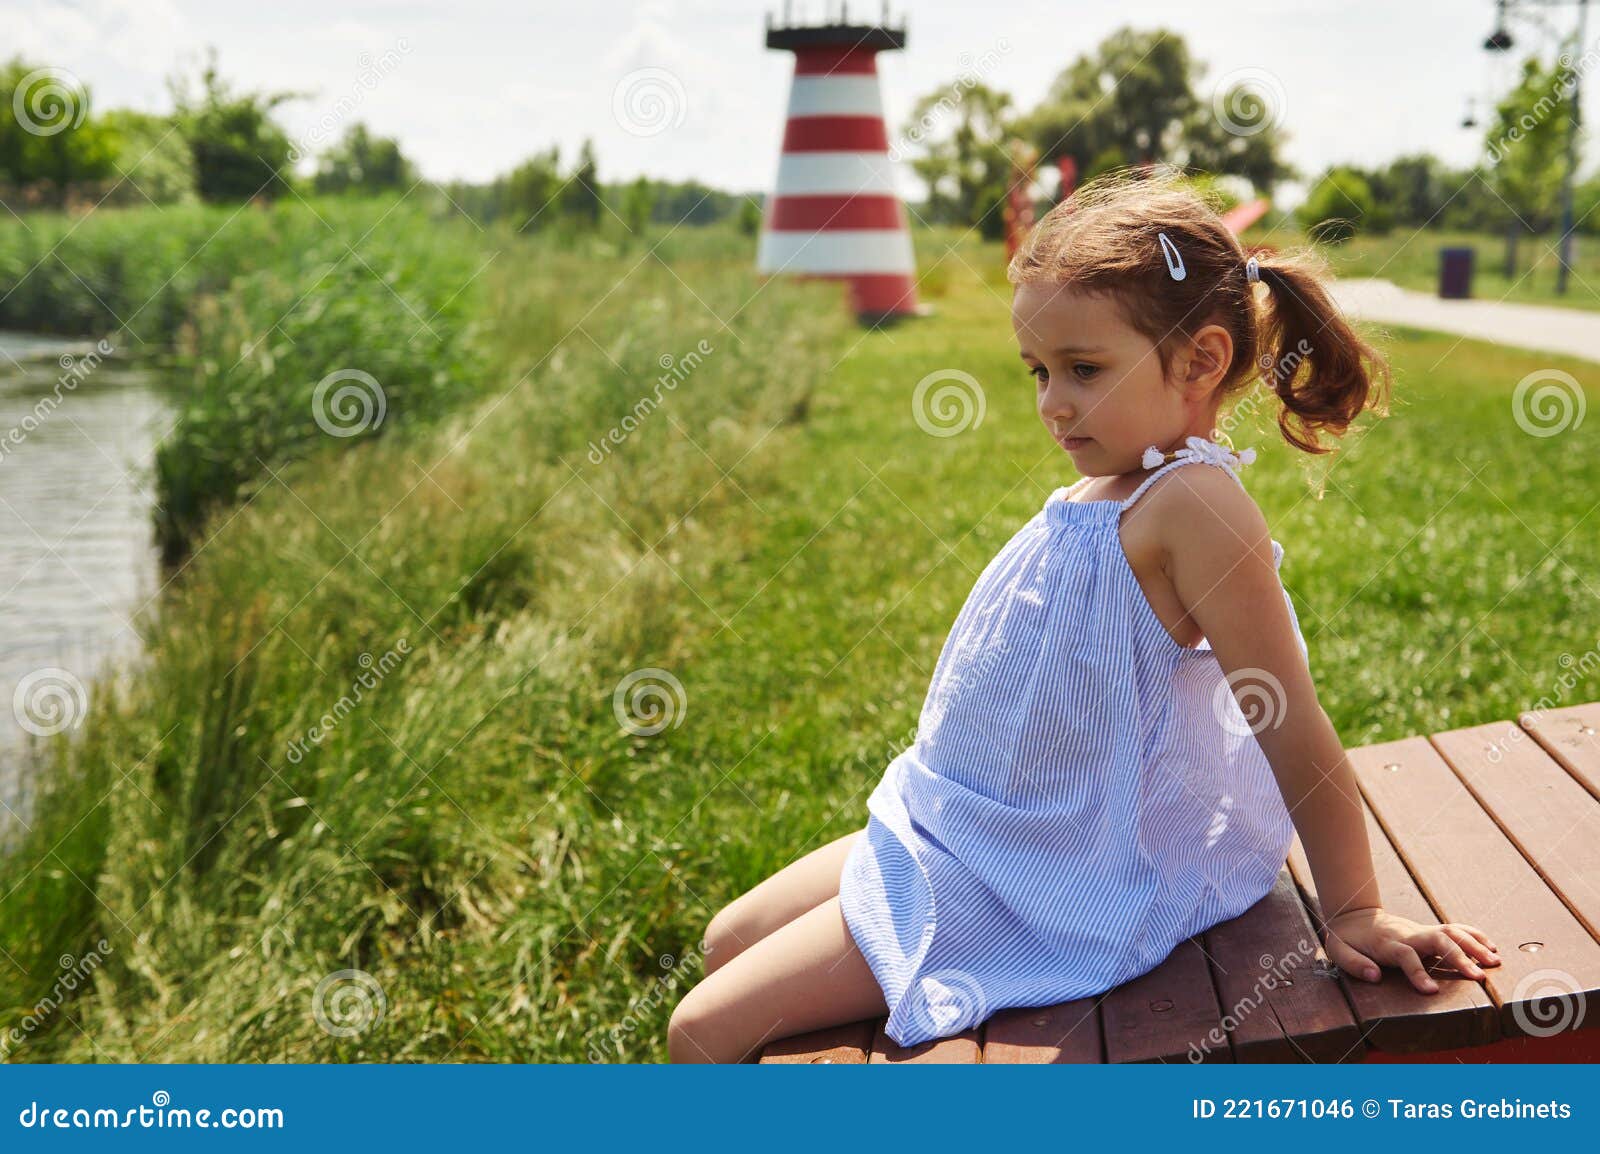 Beautiful Baby Girl Sitting on a Wooden Bench on a River Bank and ...